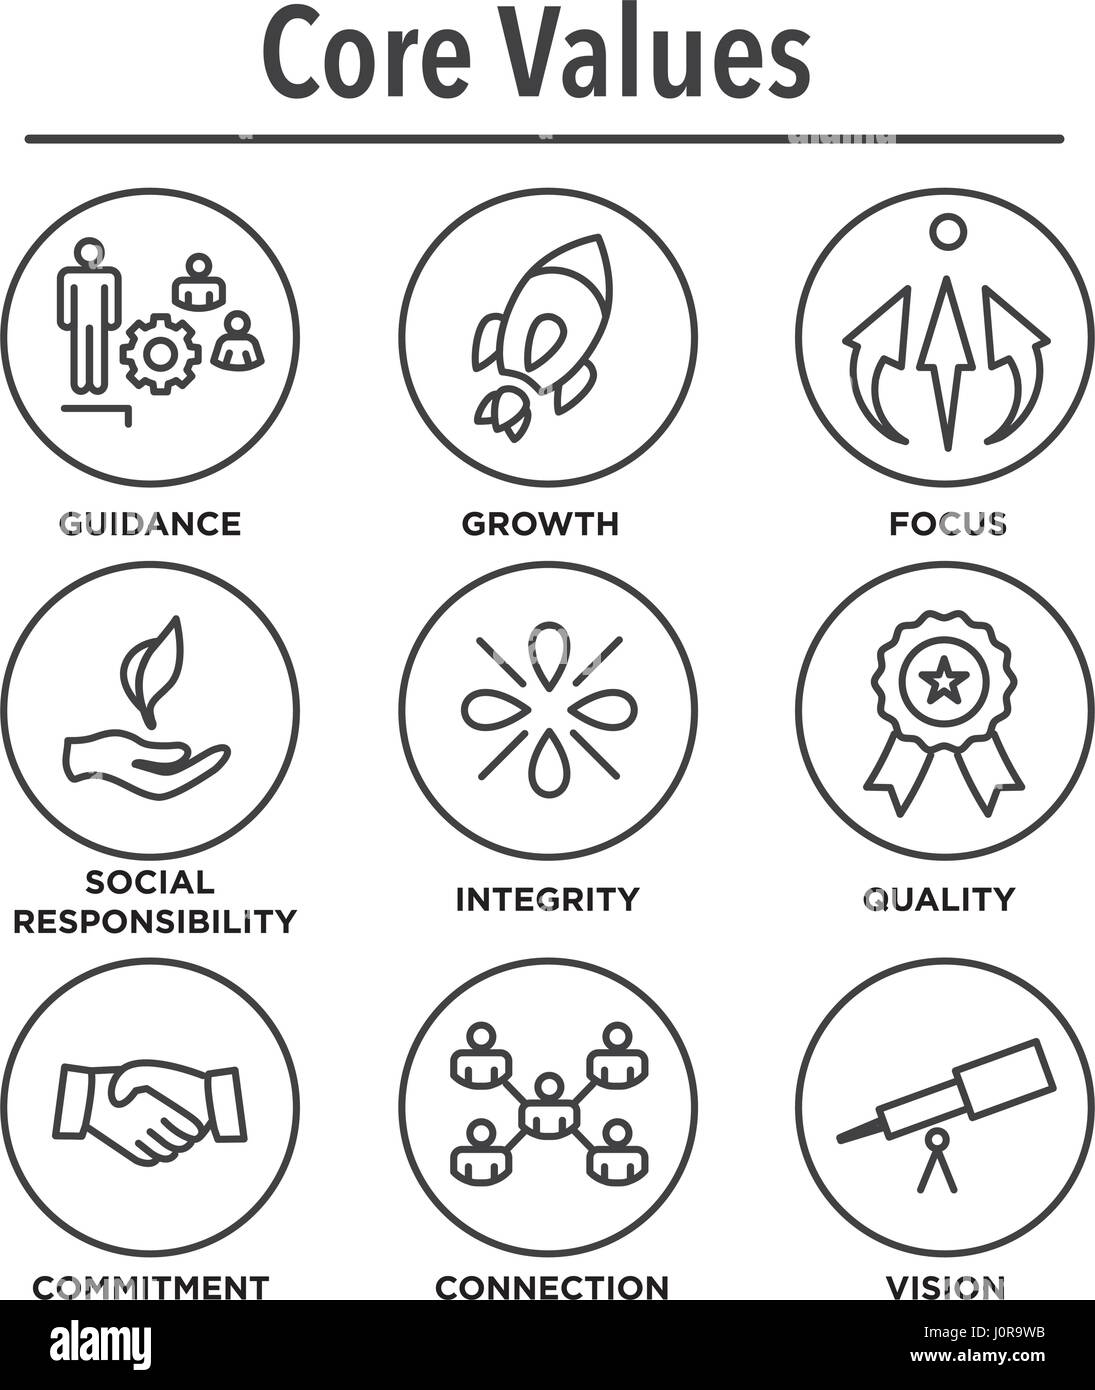 Company Core Values Outline Icons for Websites or Infographics Stock Vector